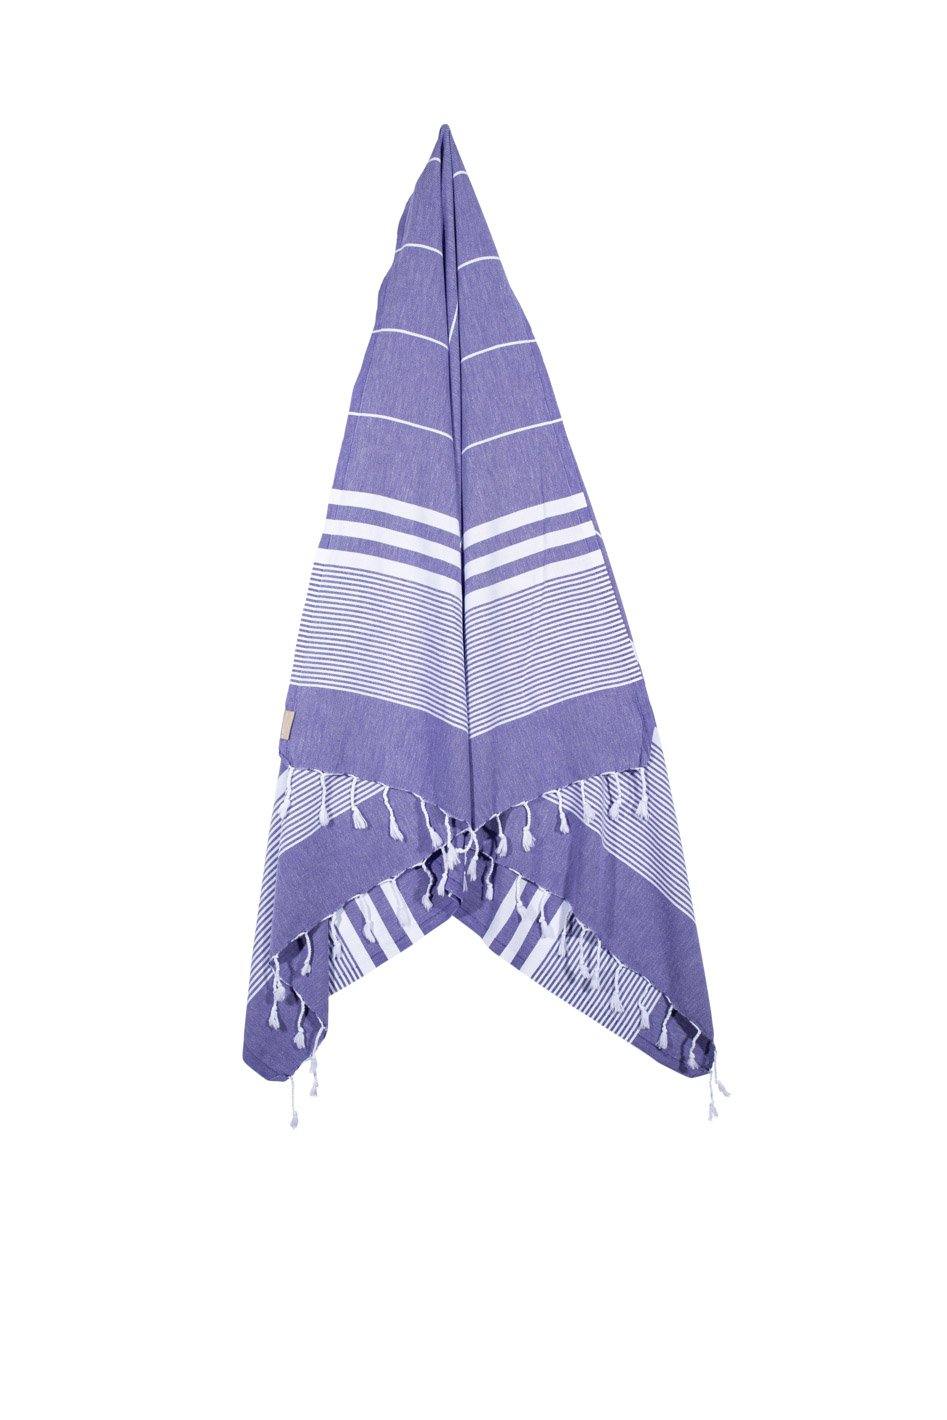 Kali - Purple and White Striped Quick Drying Towel Hanging